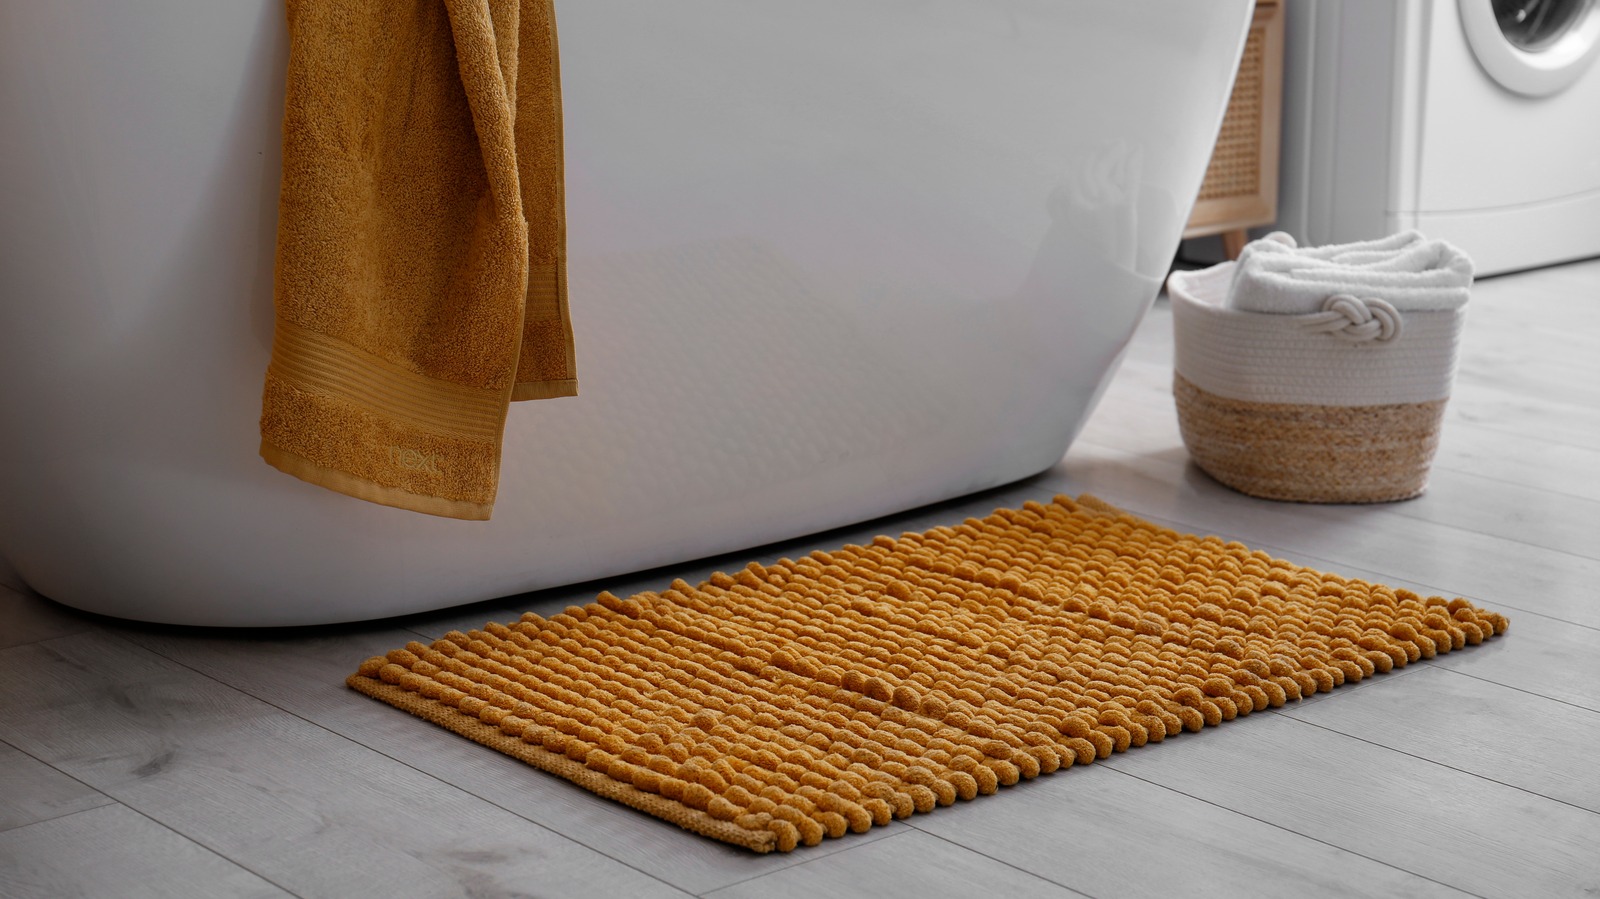 Use Baking Soda On Your Bath Mats For A Truly Clean Smell